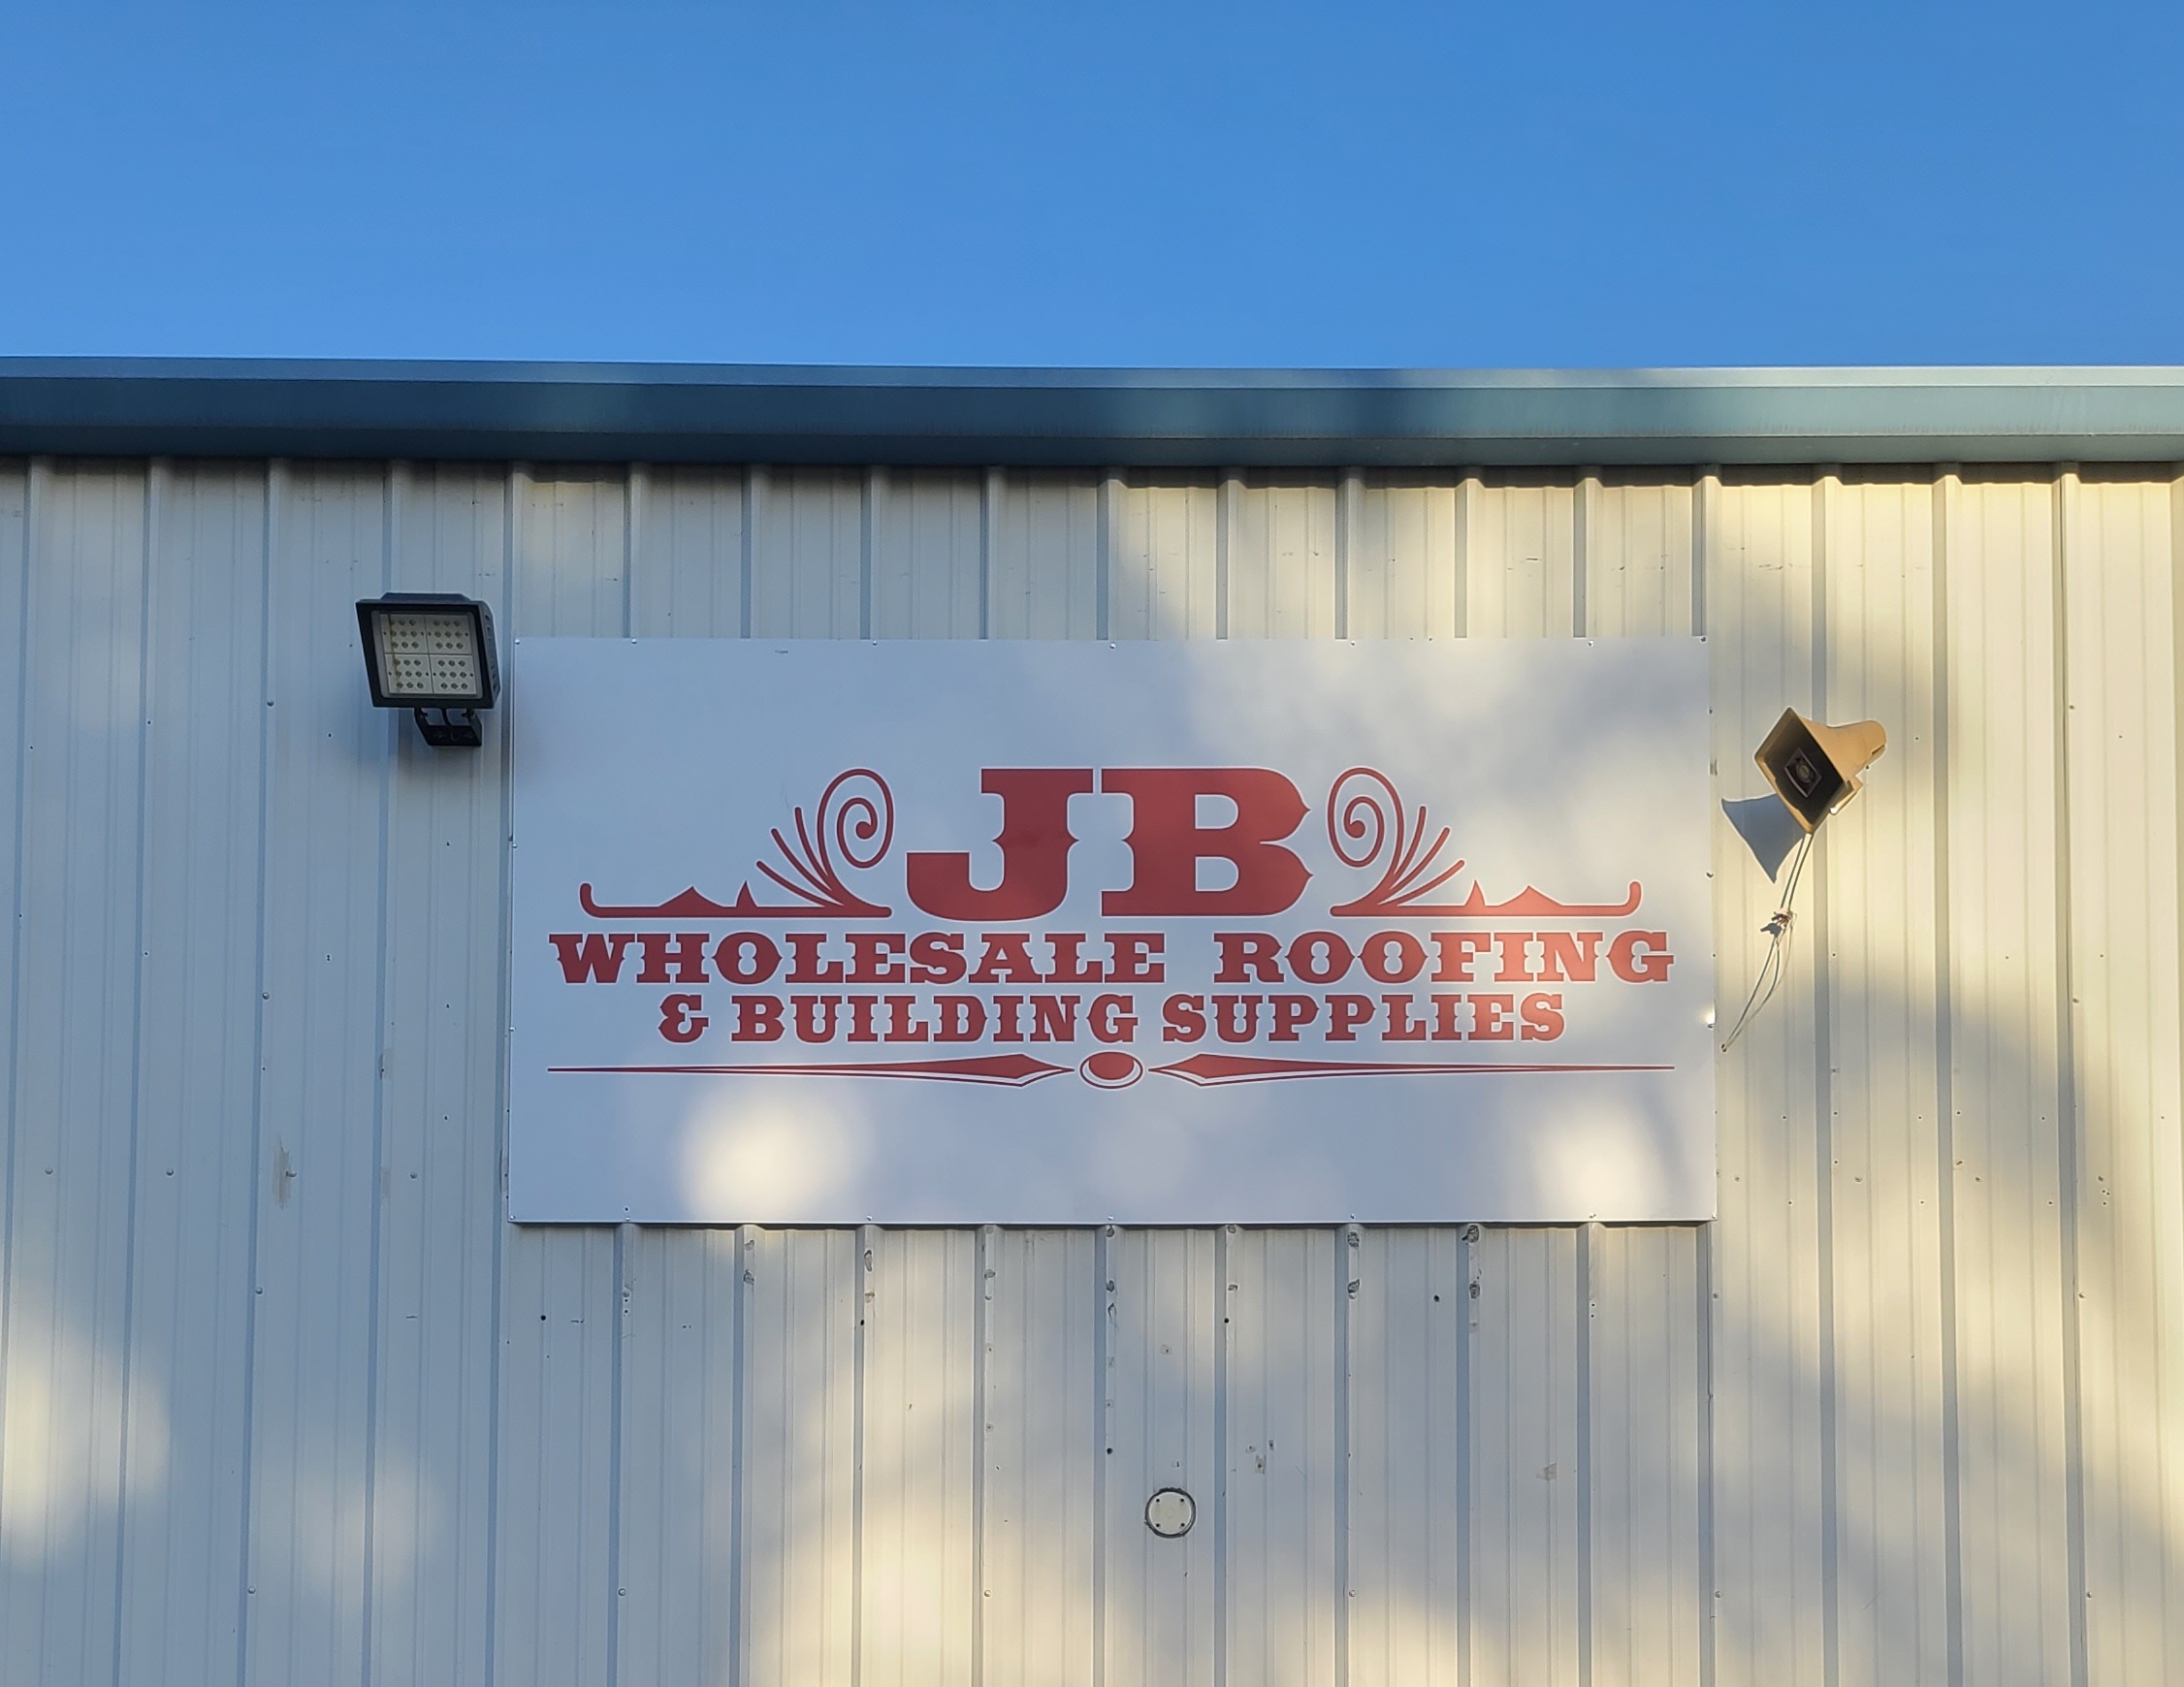 Our comprehensive sign package for JB Wholesale Roofing & Building Supplies also includes this handsome monument sign for their Pomona branch.